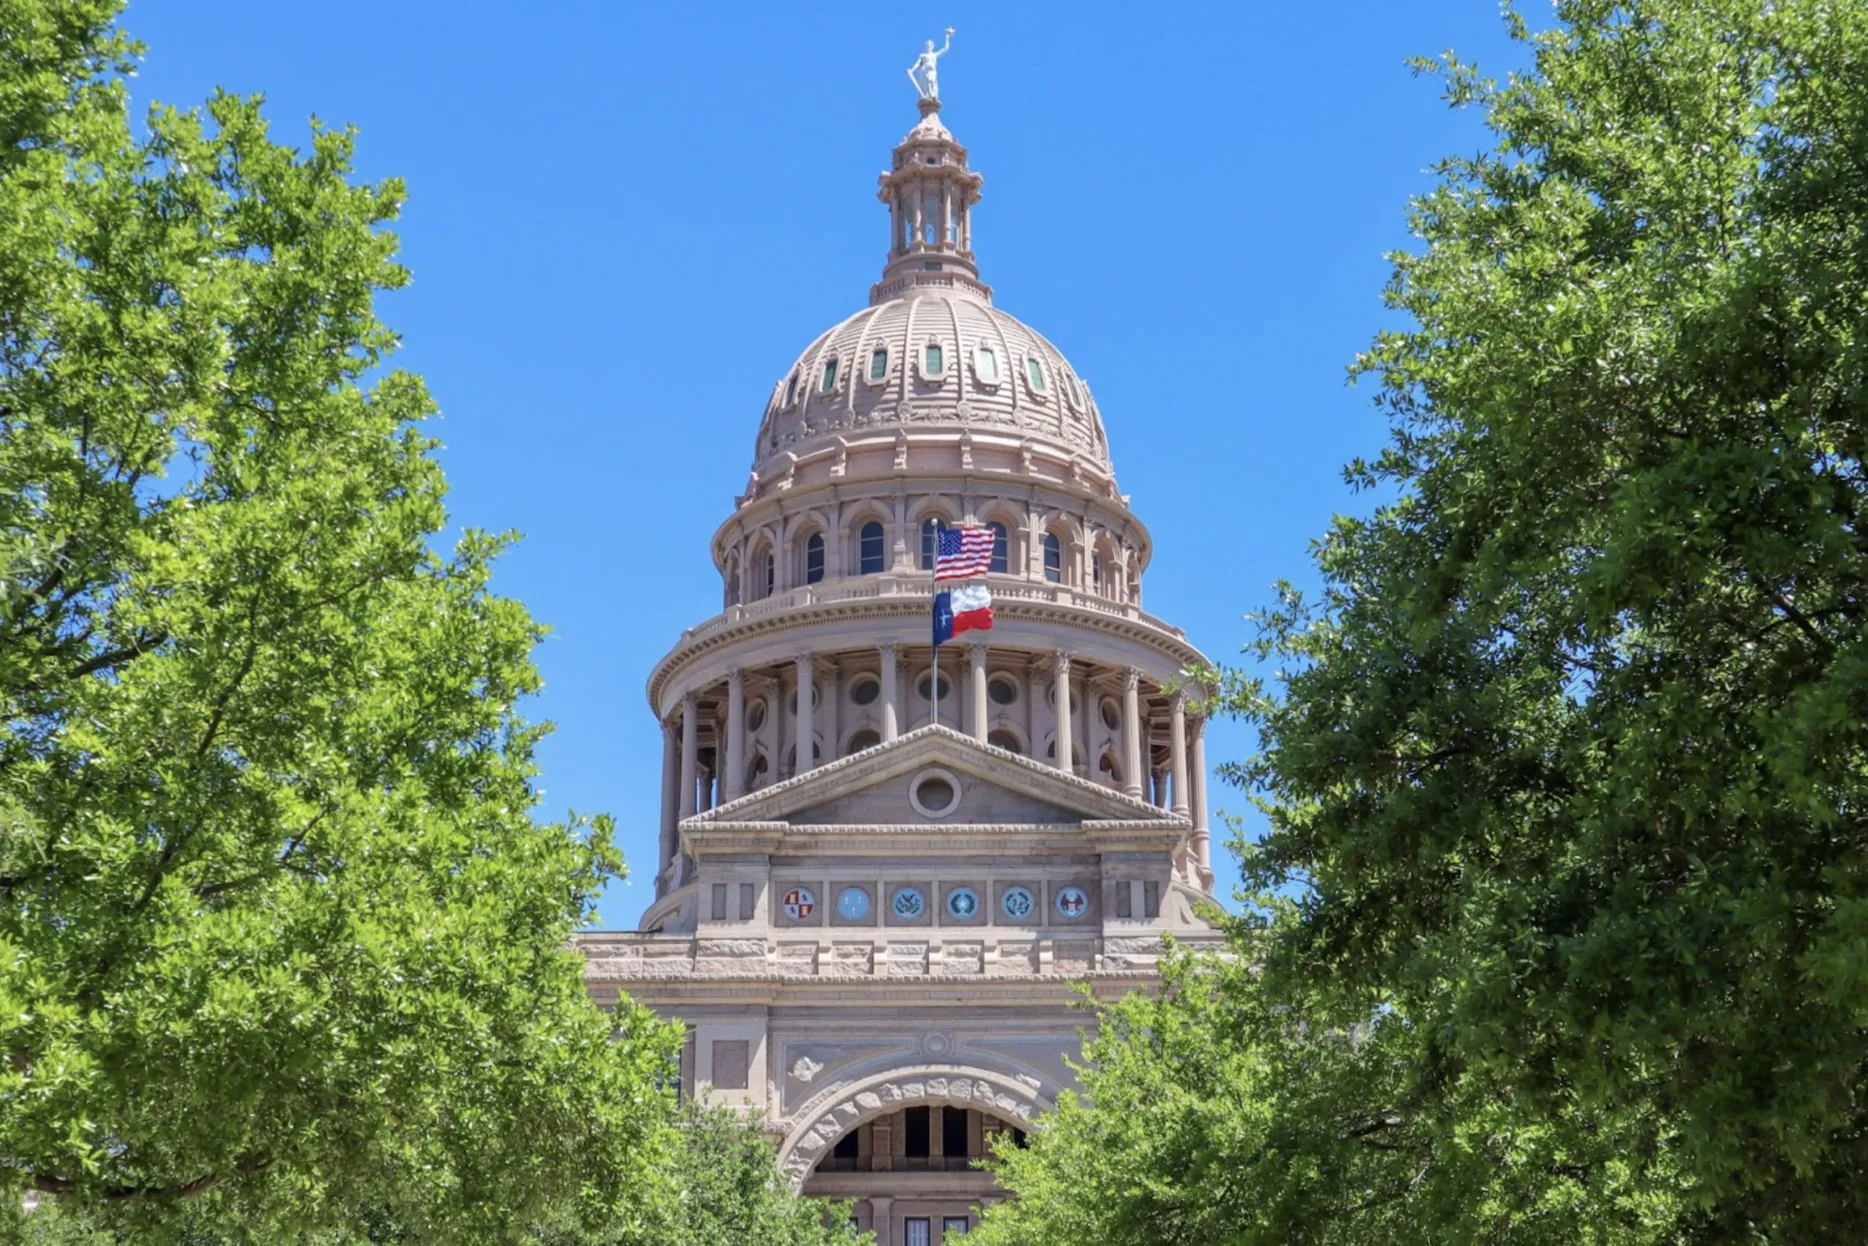 The dome of Texas State Capitol in Austin as seen from ground level